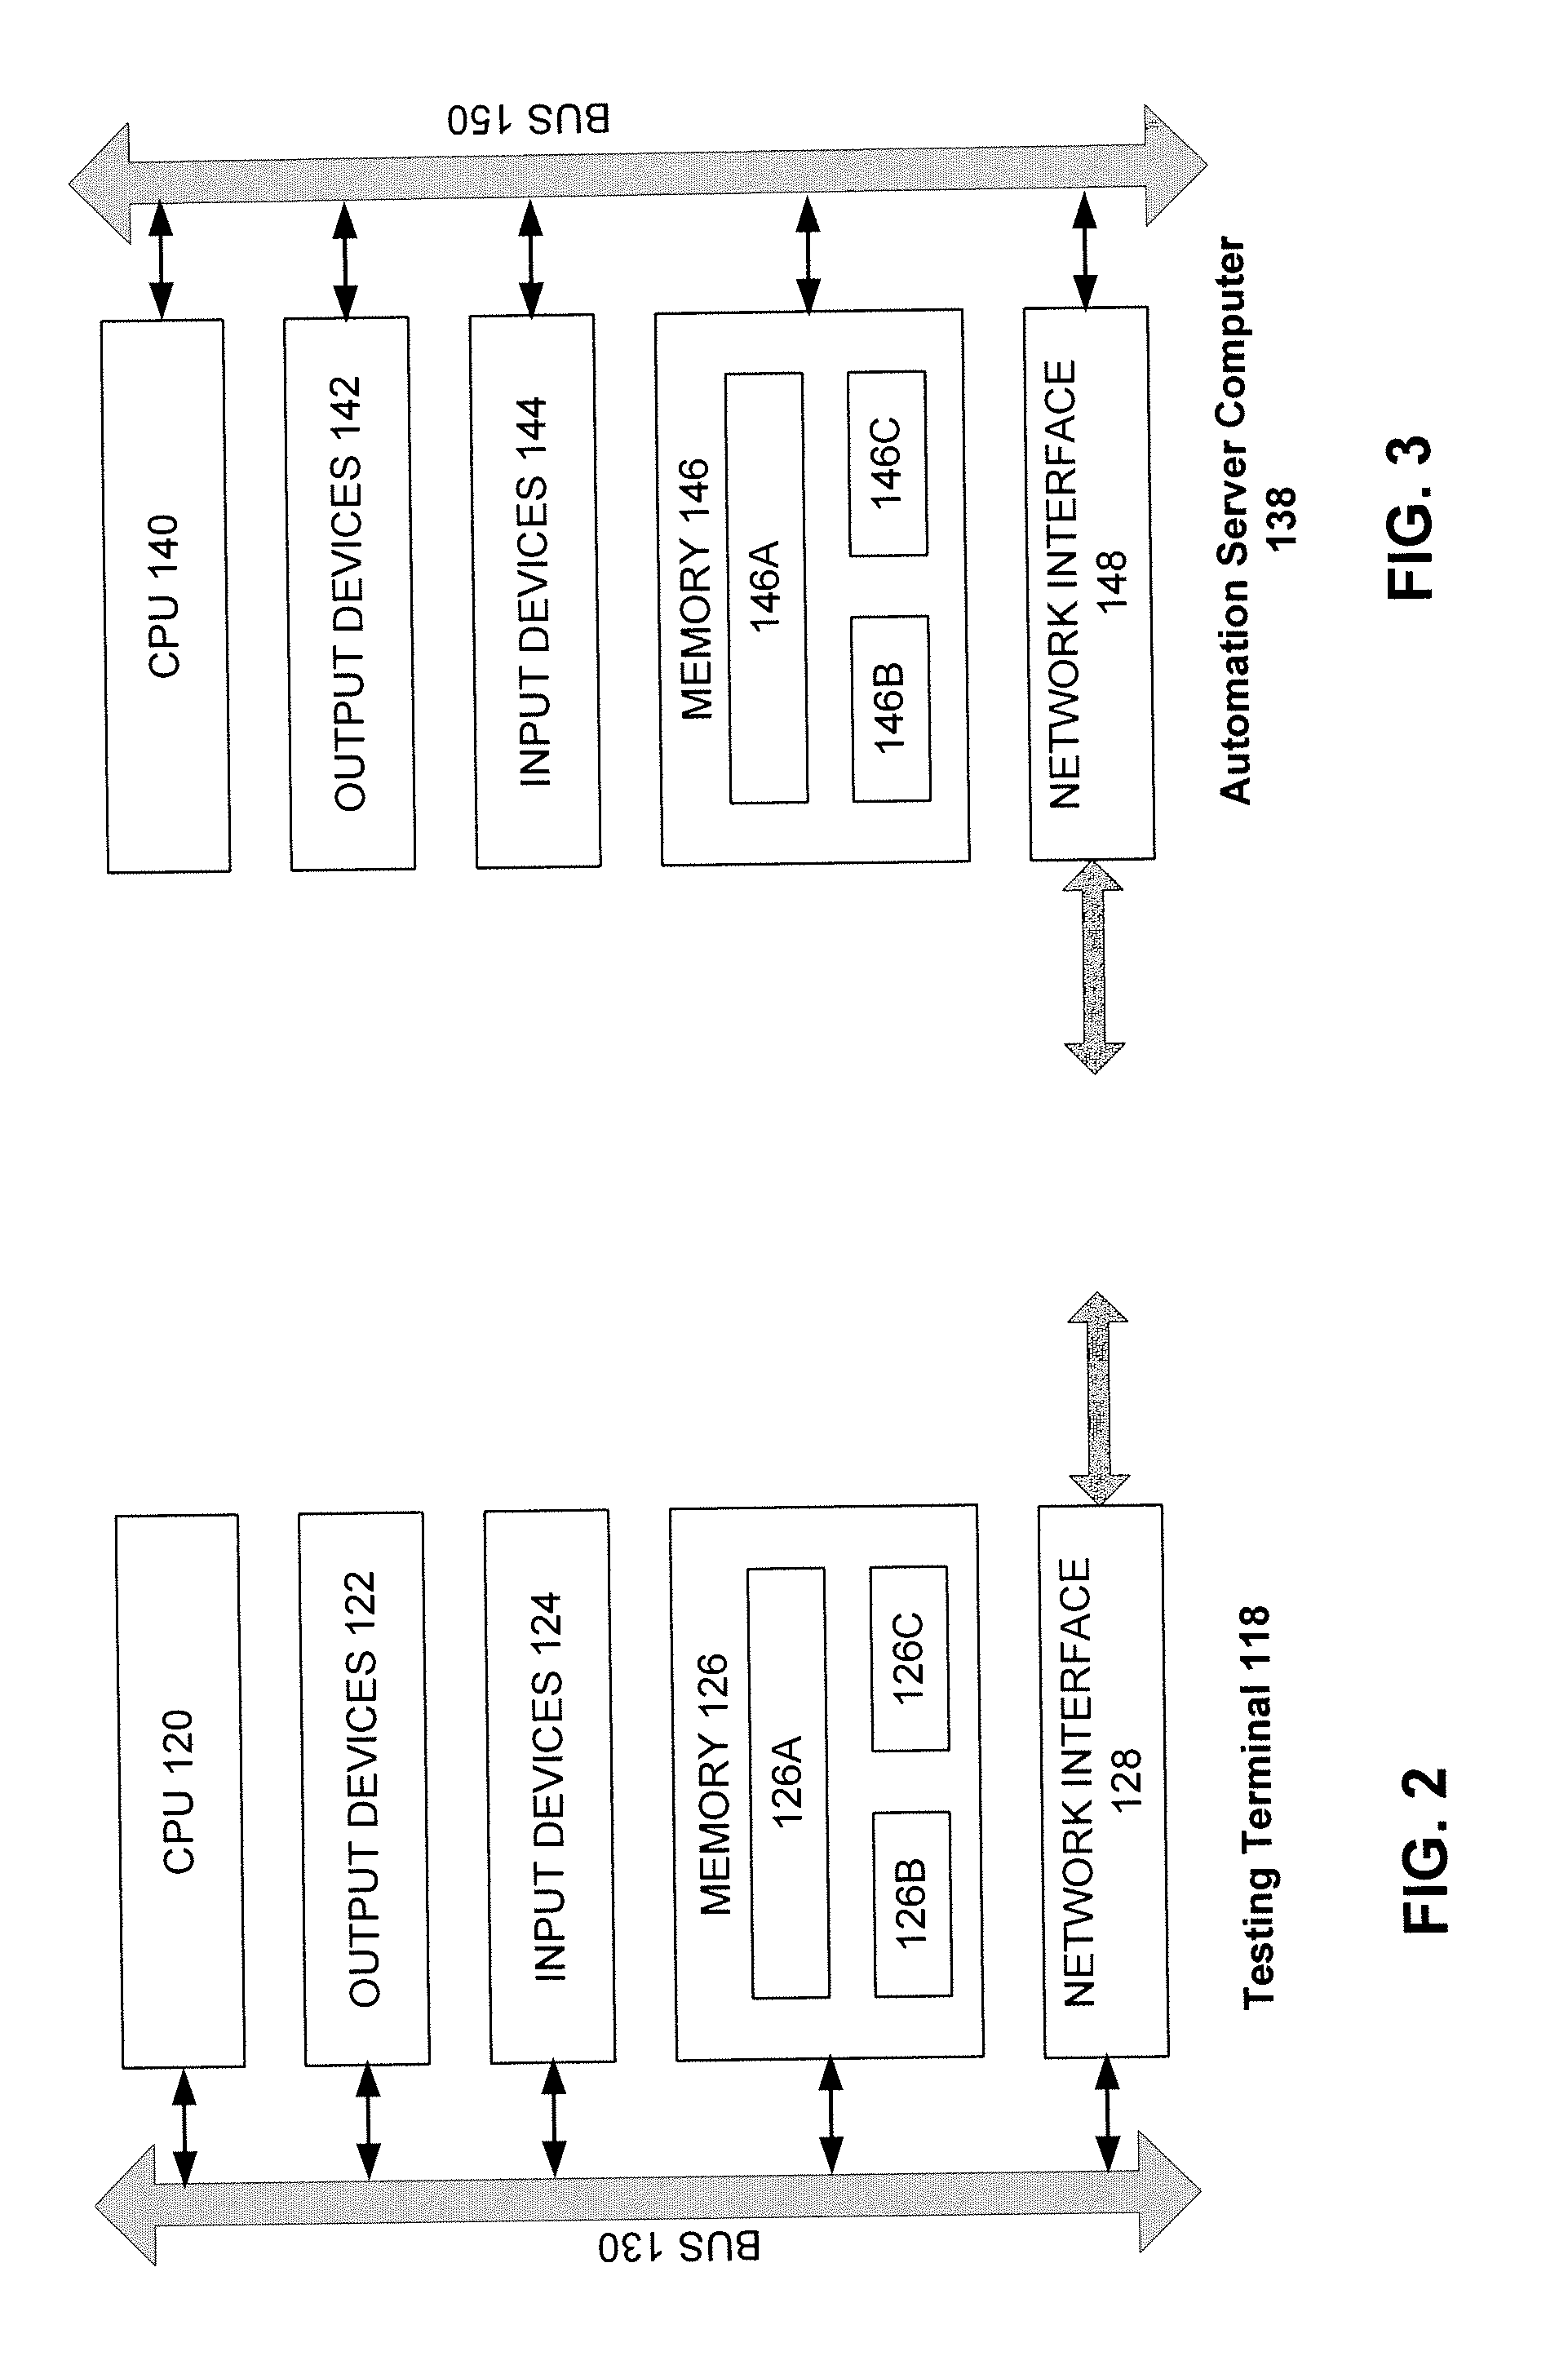 Method and system for intelligent automated testing in a multi-vendor, multi-protocol heterogeneous environment